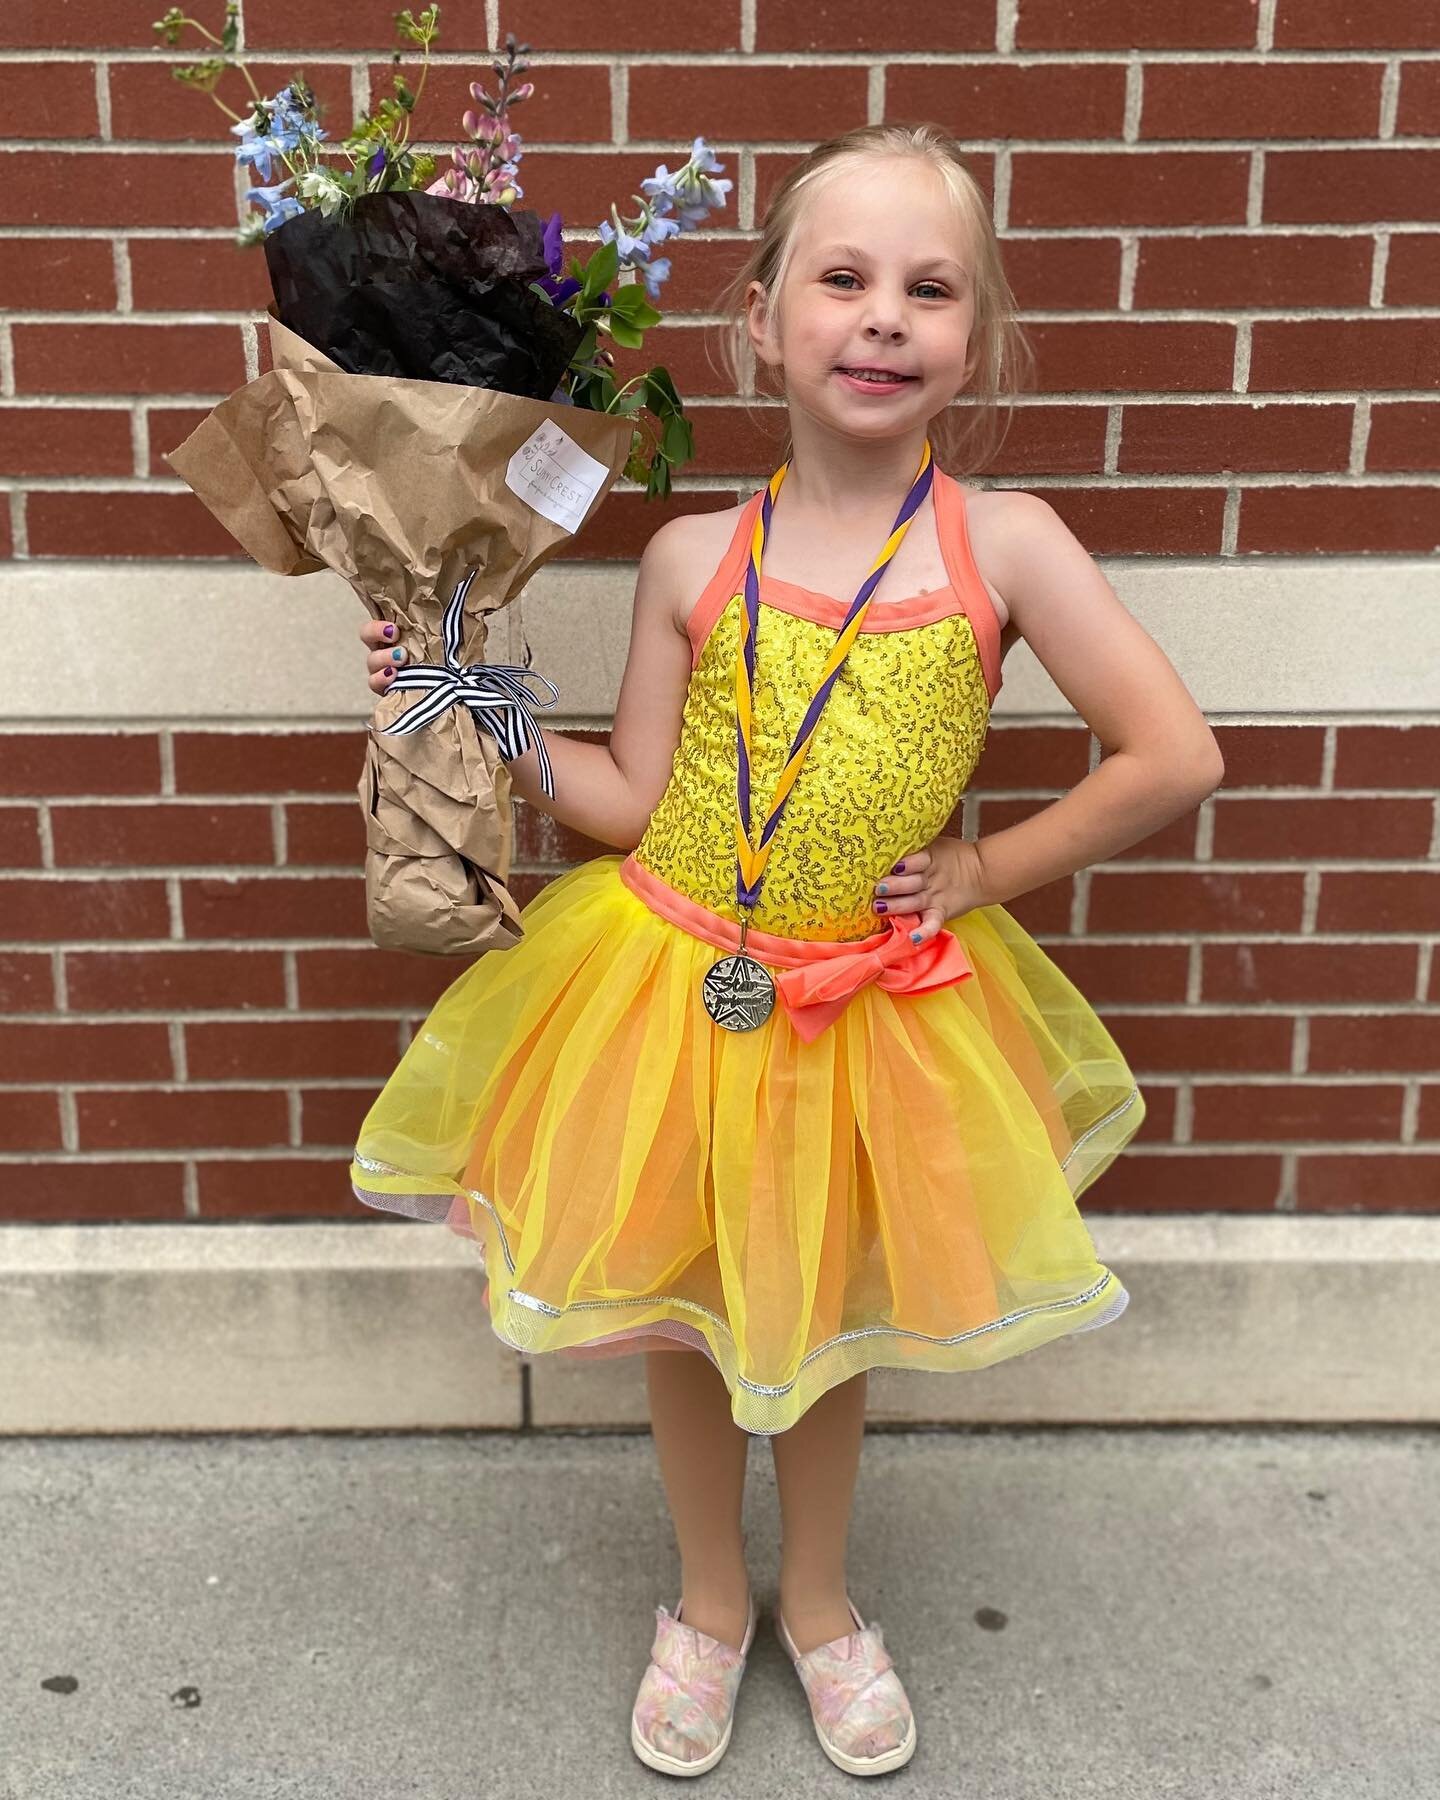 This little sweetie pie LOVES to dance to the Bear Hunt song. She also loves to play freeze dance with her friends! Very beautiful moments were captured with her shining &ldquo;Star Performer&rdquo; medal! 💗💃

#dance #hudsonny #hudson #summerdance 